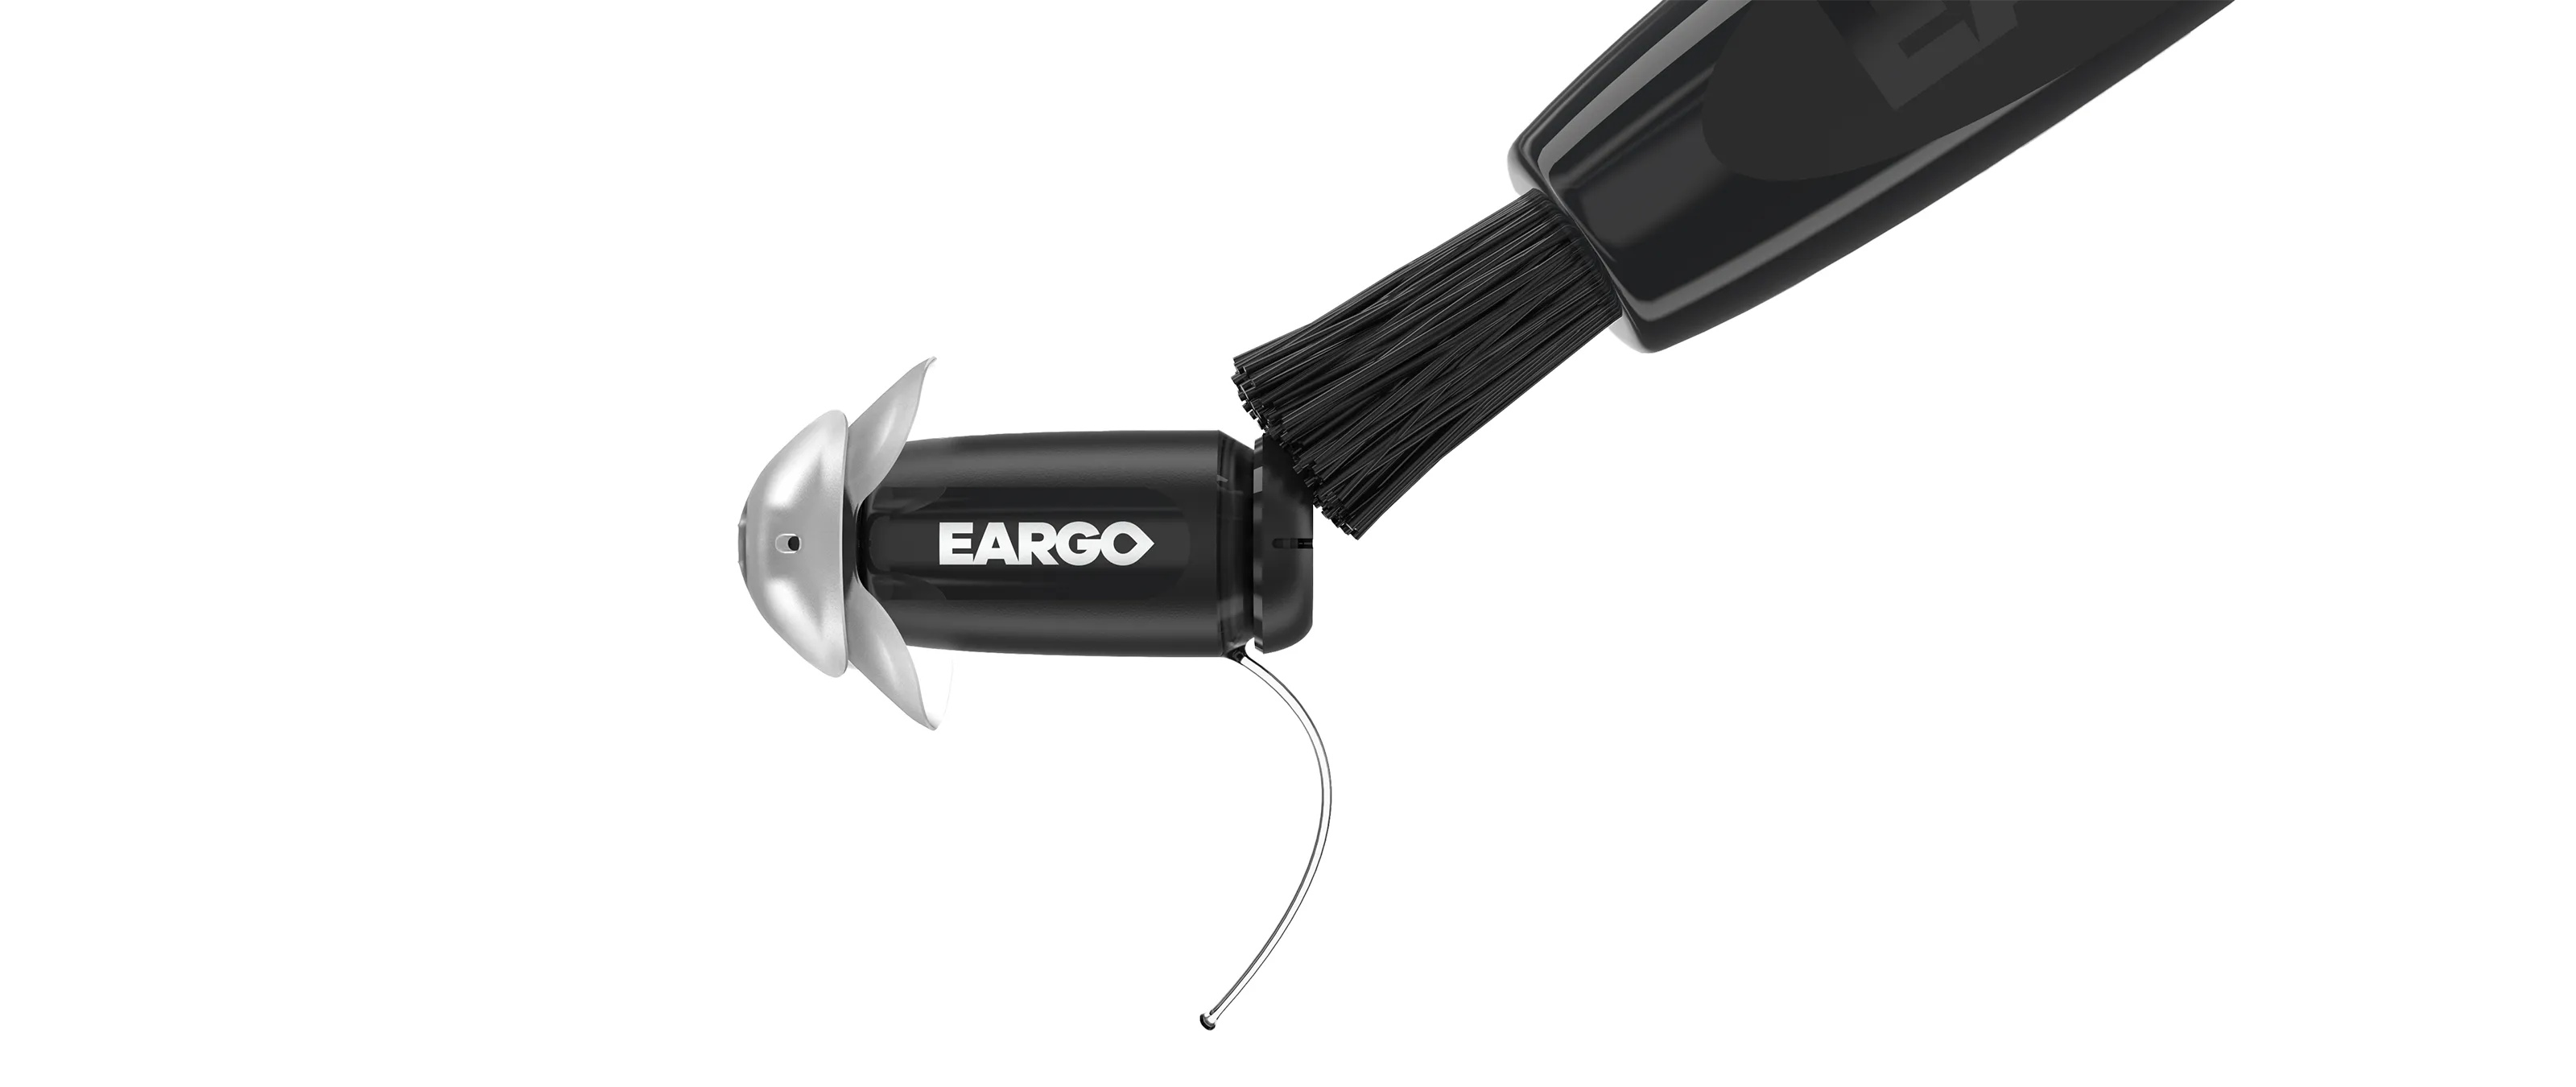 Eargo hearing aid with cleaning brush